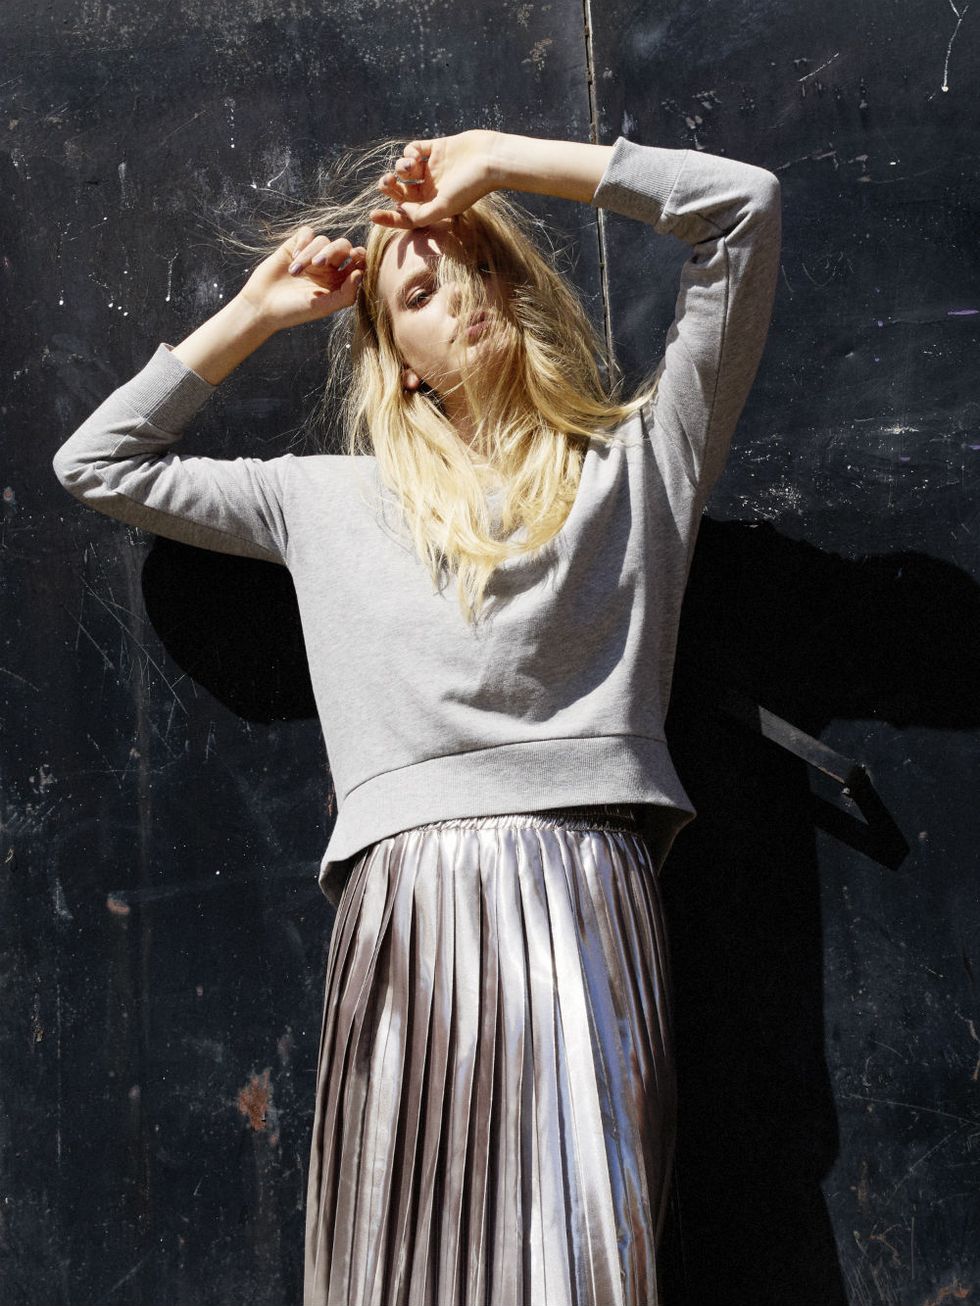 V by Very grey sweat shirt and pleated skirt